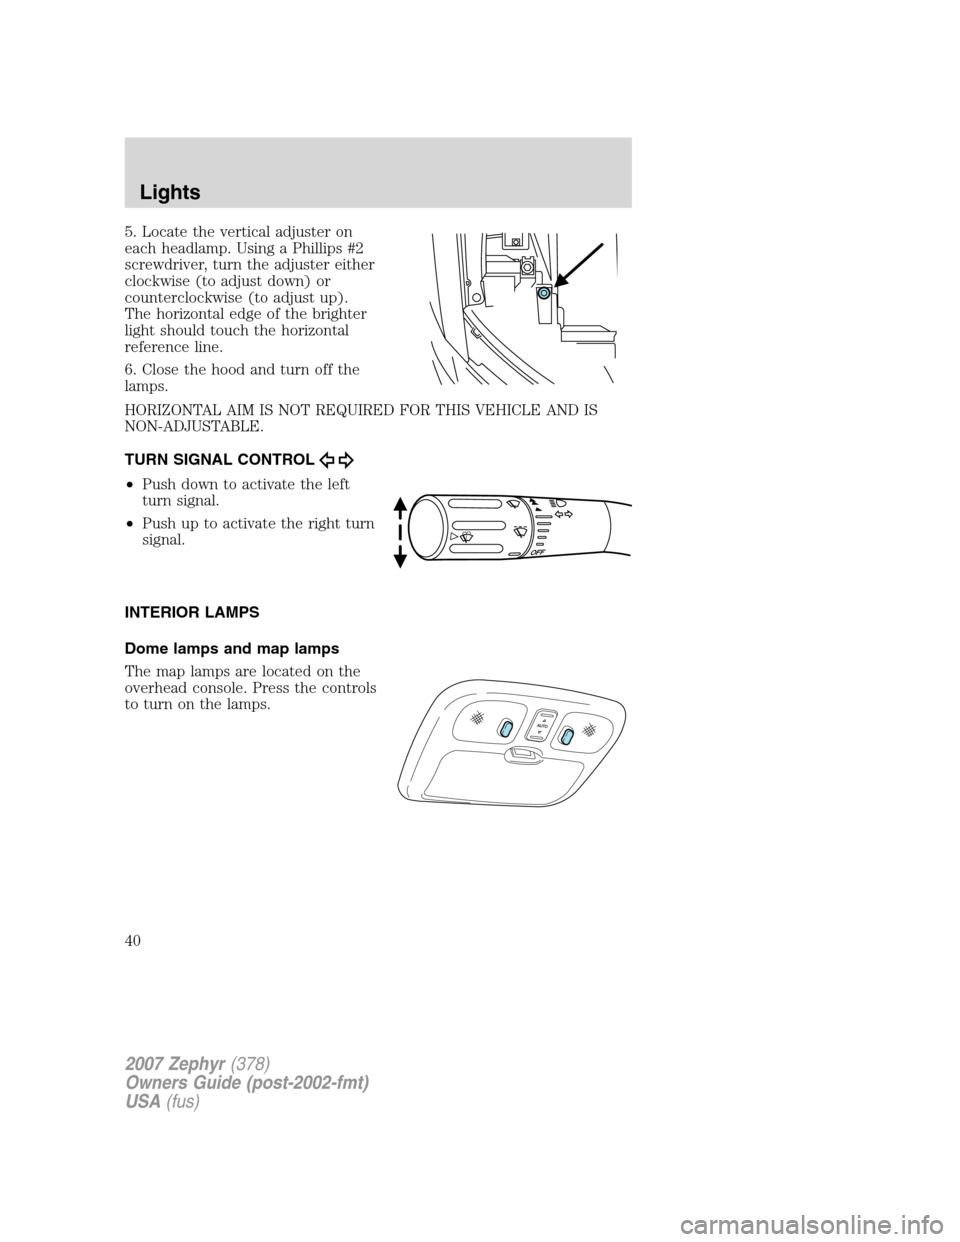 LINCOLN MKZ 2007  Owners Manual 5. Locate the vertical adjuster on
each headlamp. Using a Phillips #2
screwdriver, turn the adjuster either
clockwise (to adjust down) or
counterclockwise (to adjust up).
The horizontal edge of the br